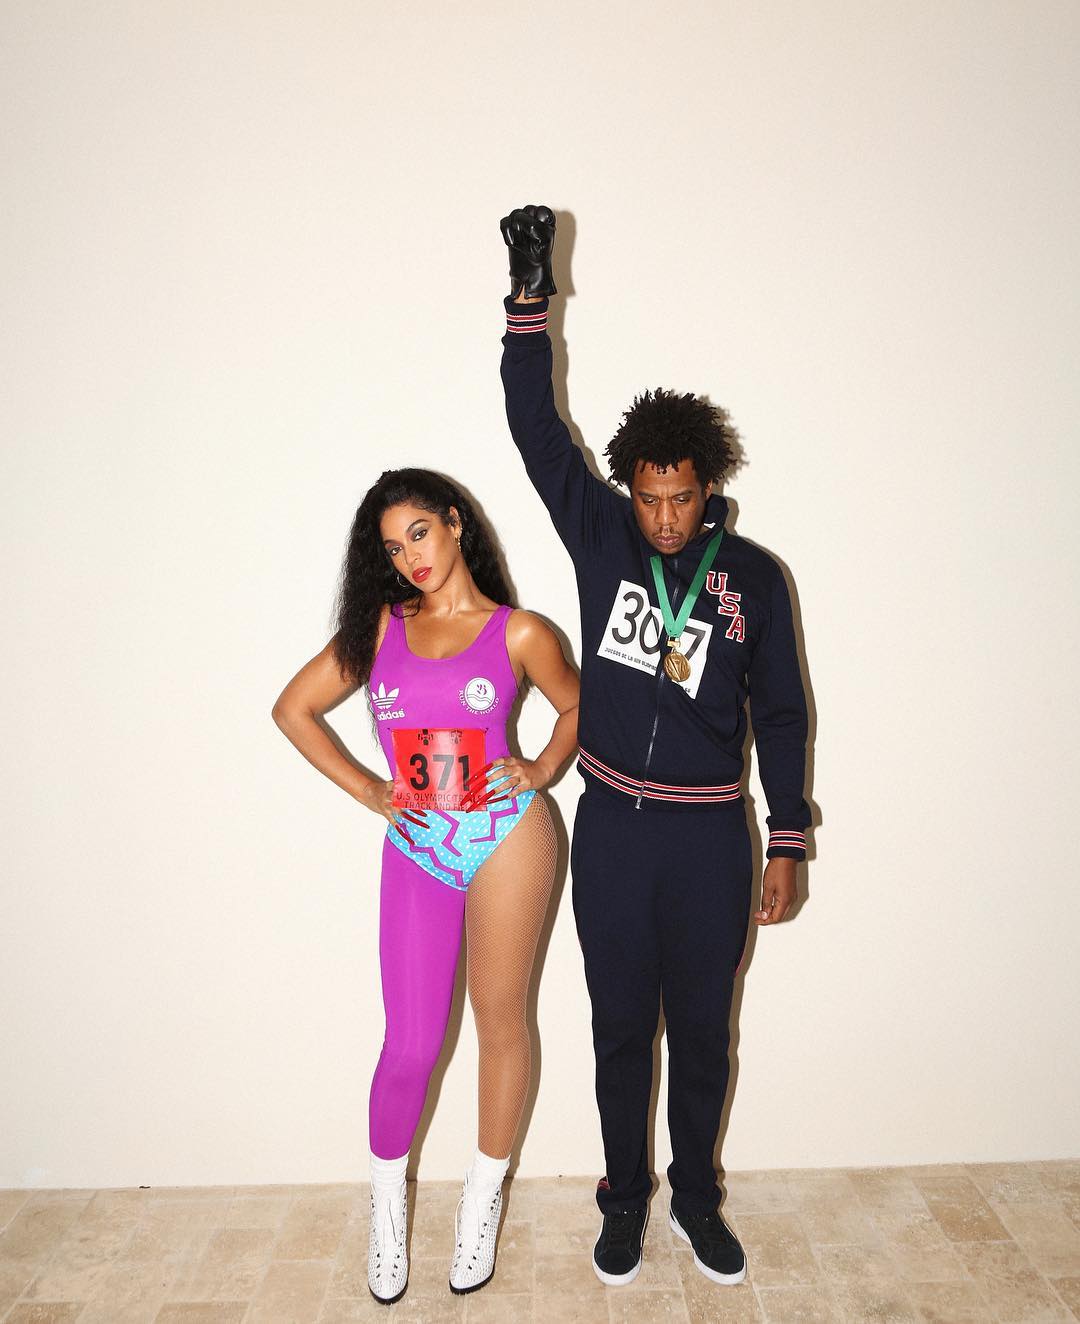 beyonce-jay-z-as-olympians-flo-jo-and-tommie-smith